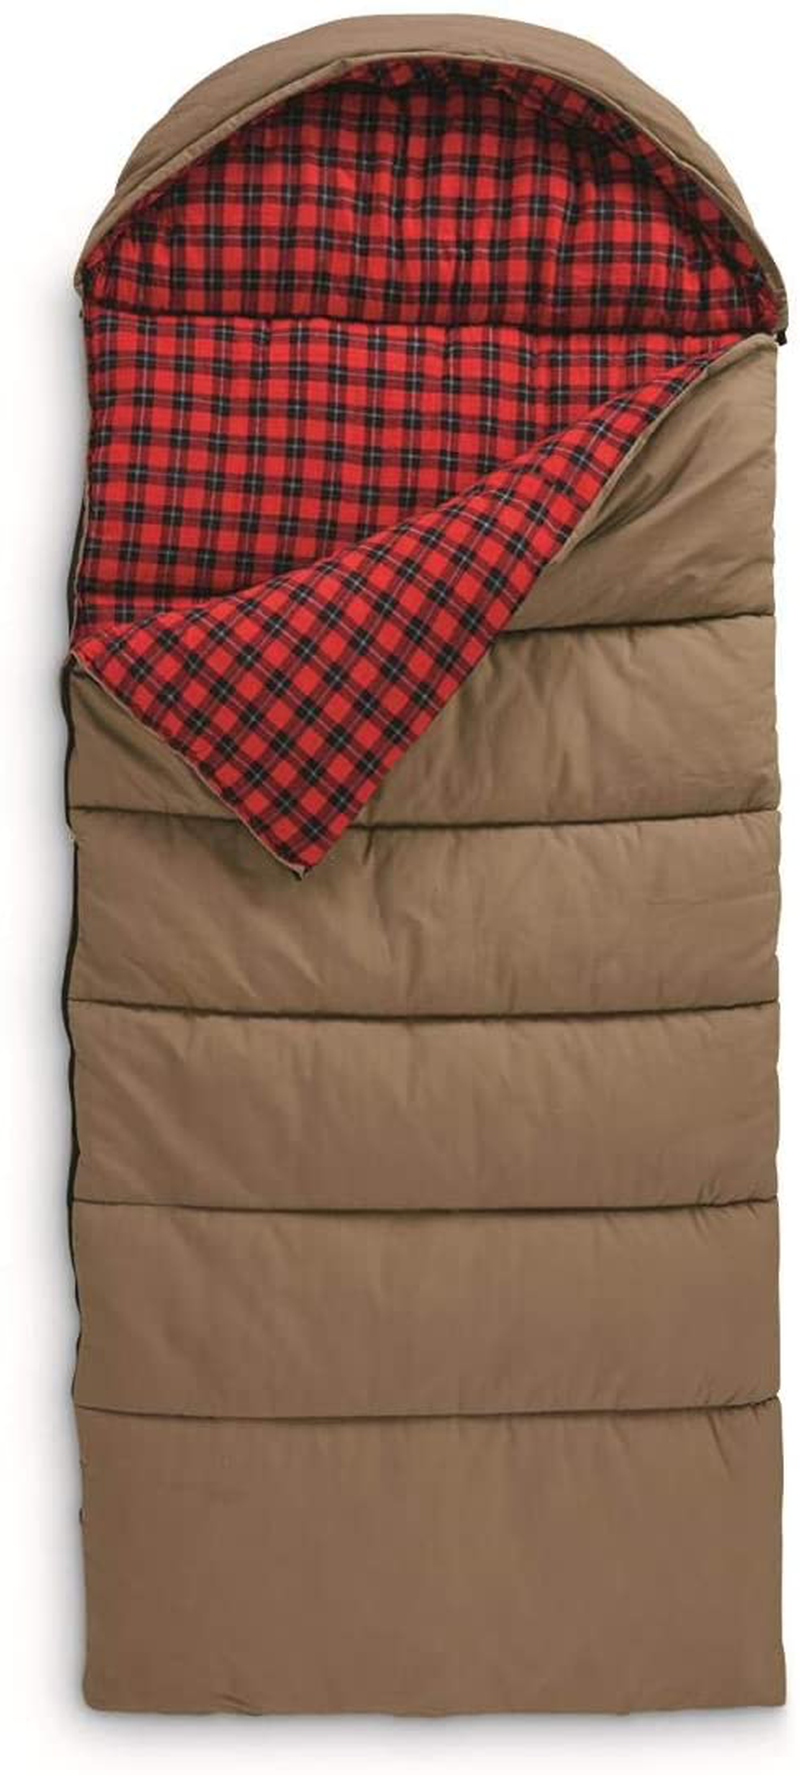 Guide Gear Canvas Hunter Extreme Sleeping Bag,